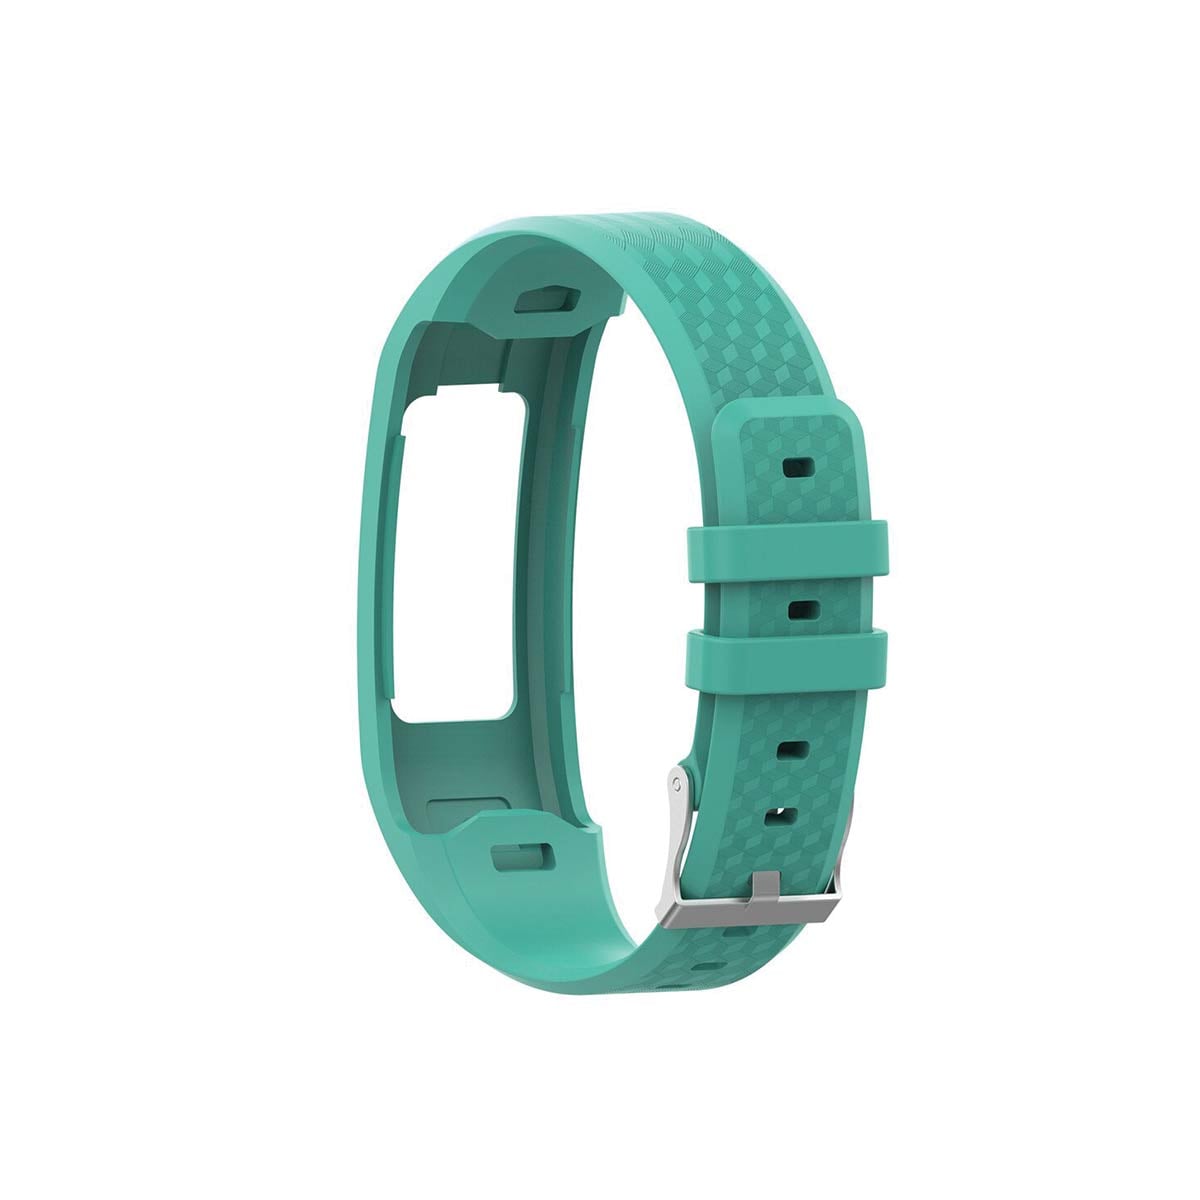 Secure Garmin Vivofit 1 & 2 Band Replacement Strap with Buckle Small Teal 